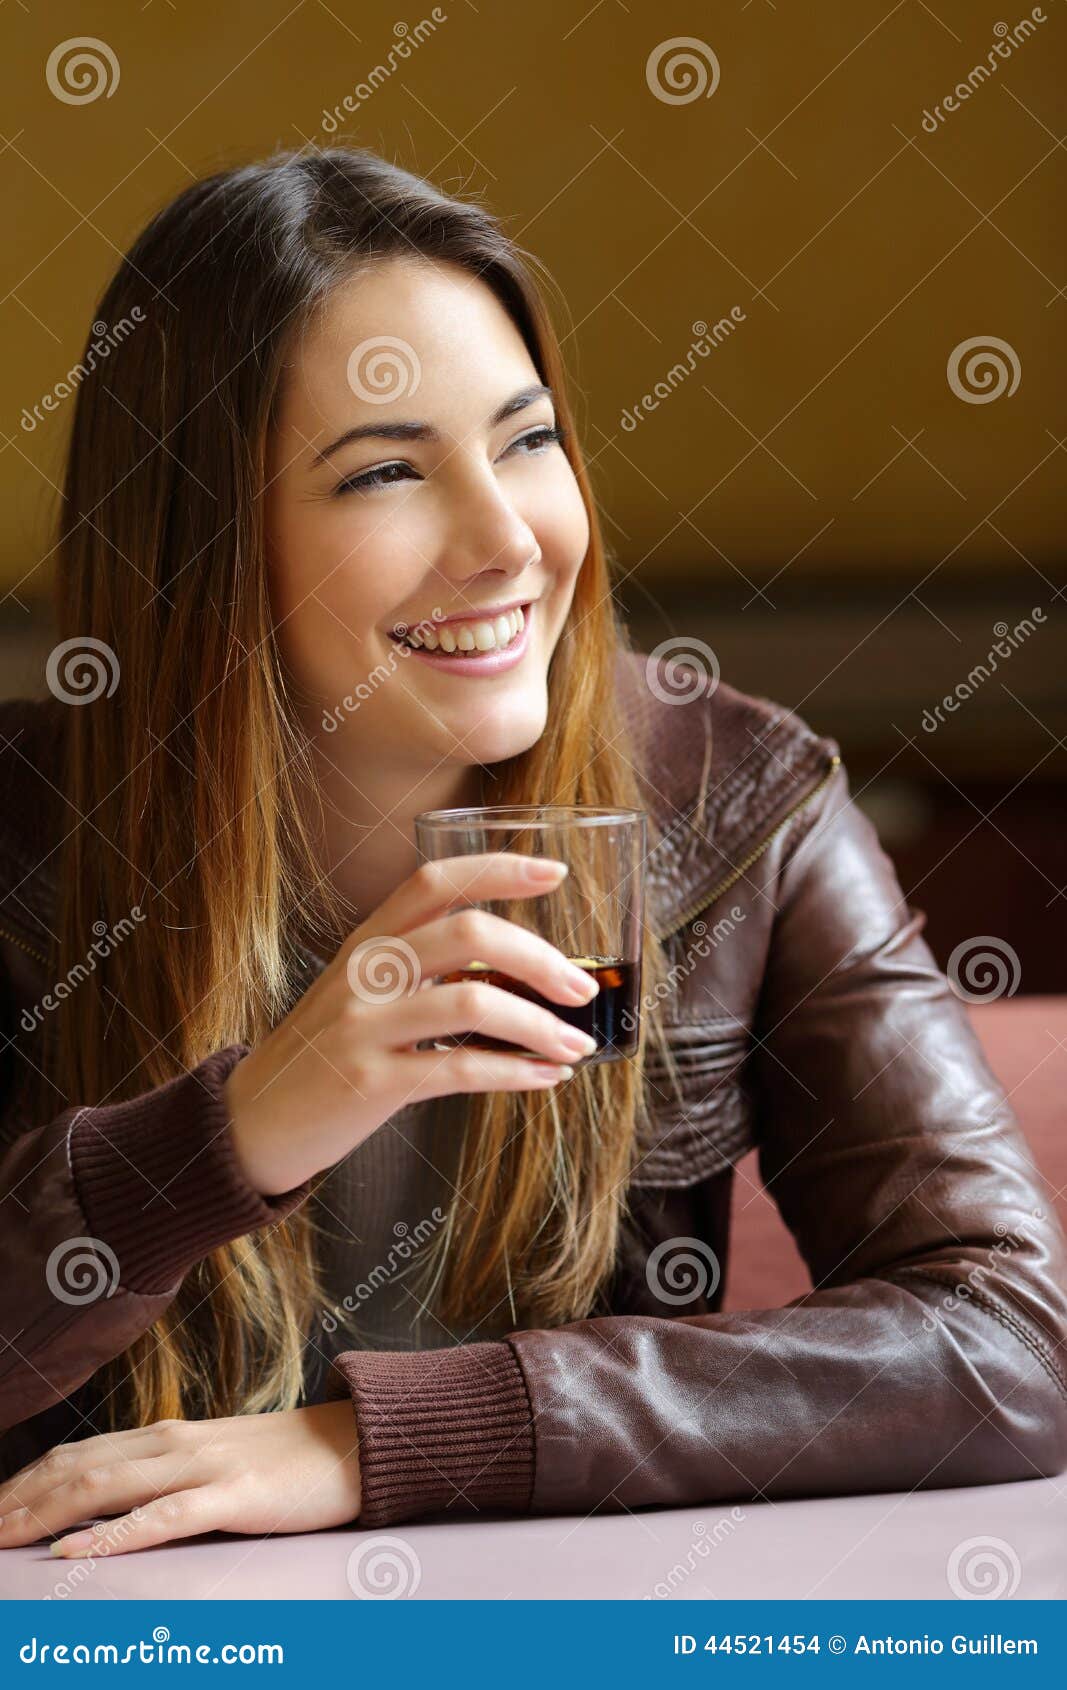 happy woman holding a refreshment in a restaurant